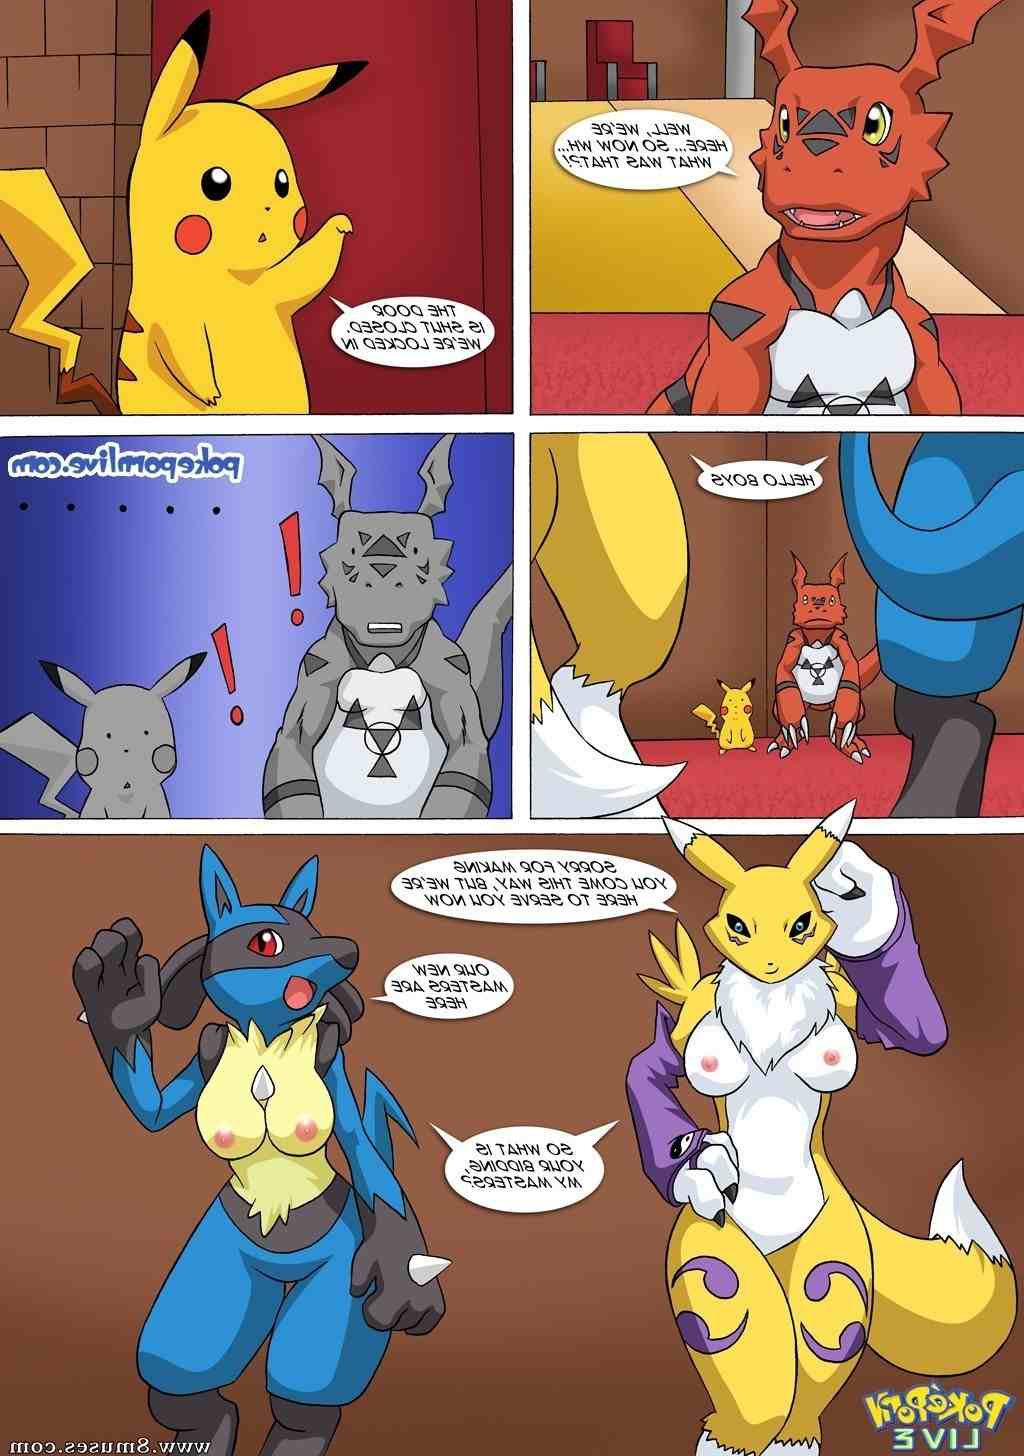 PokepornLive-Comics/Girls-come-to-play Girls_come_to_play__8muses_-_Sex_and_Porn_Comics_4.jpg